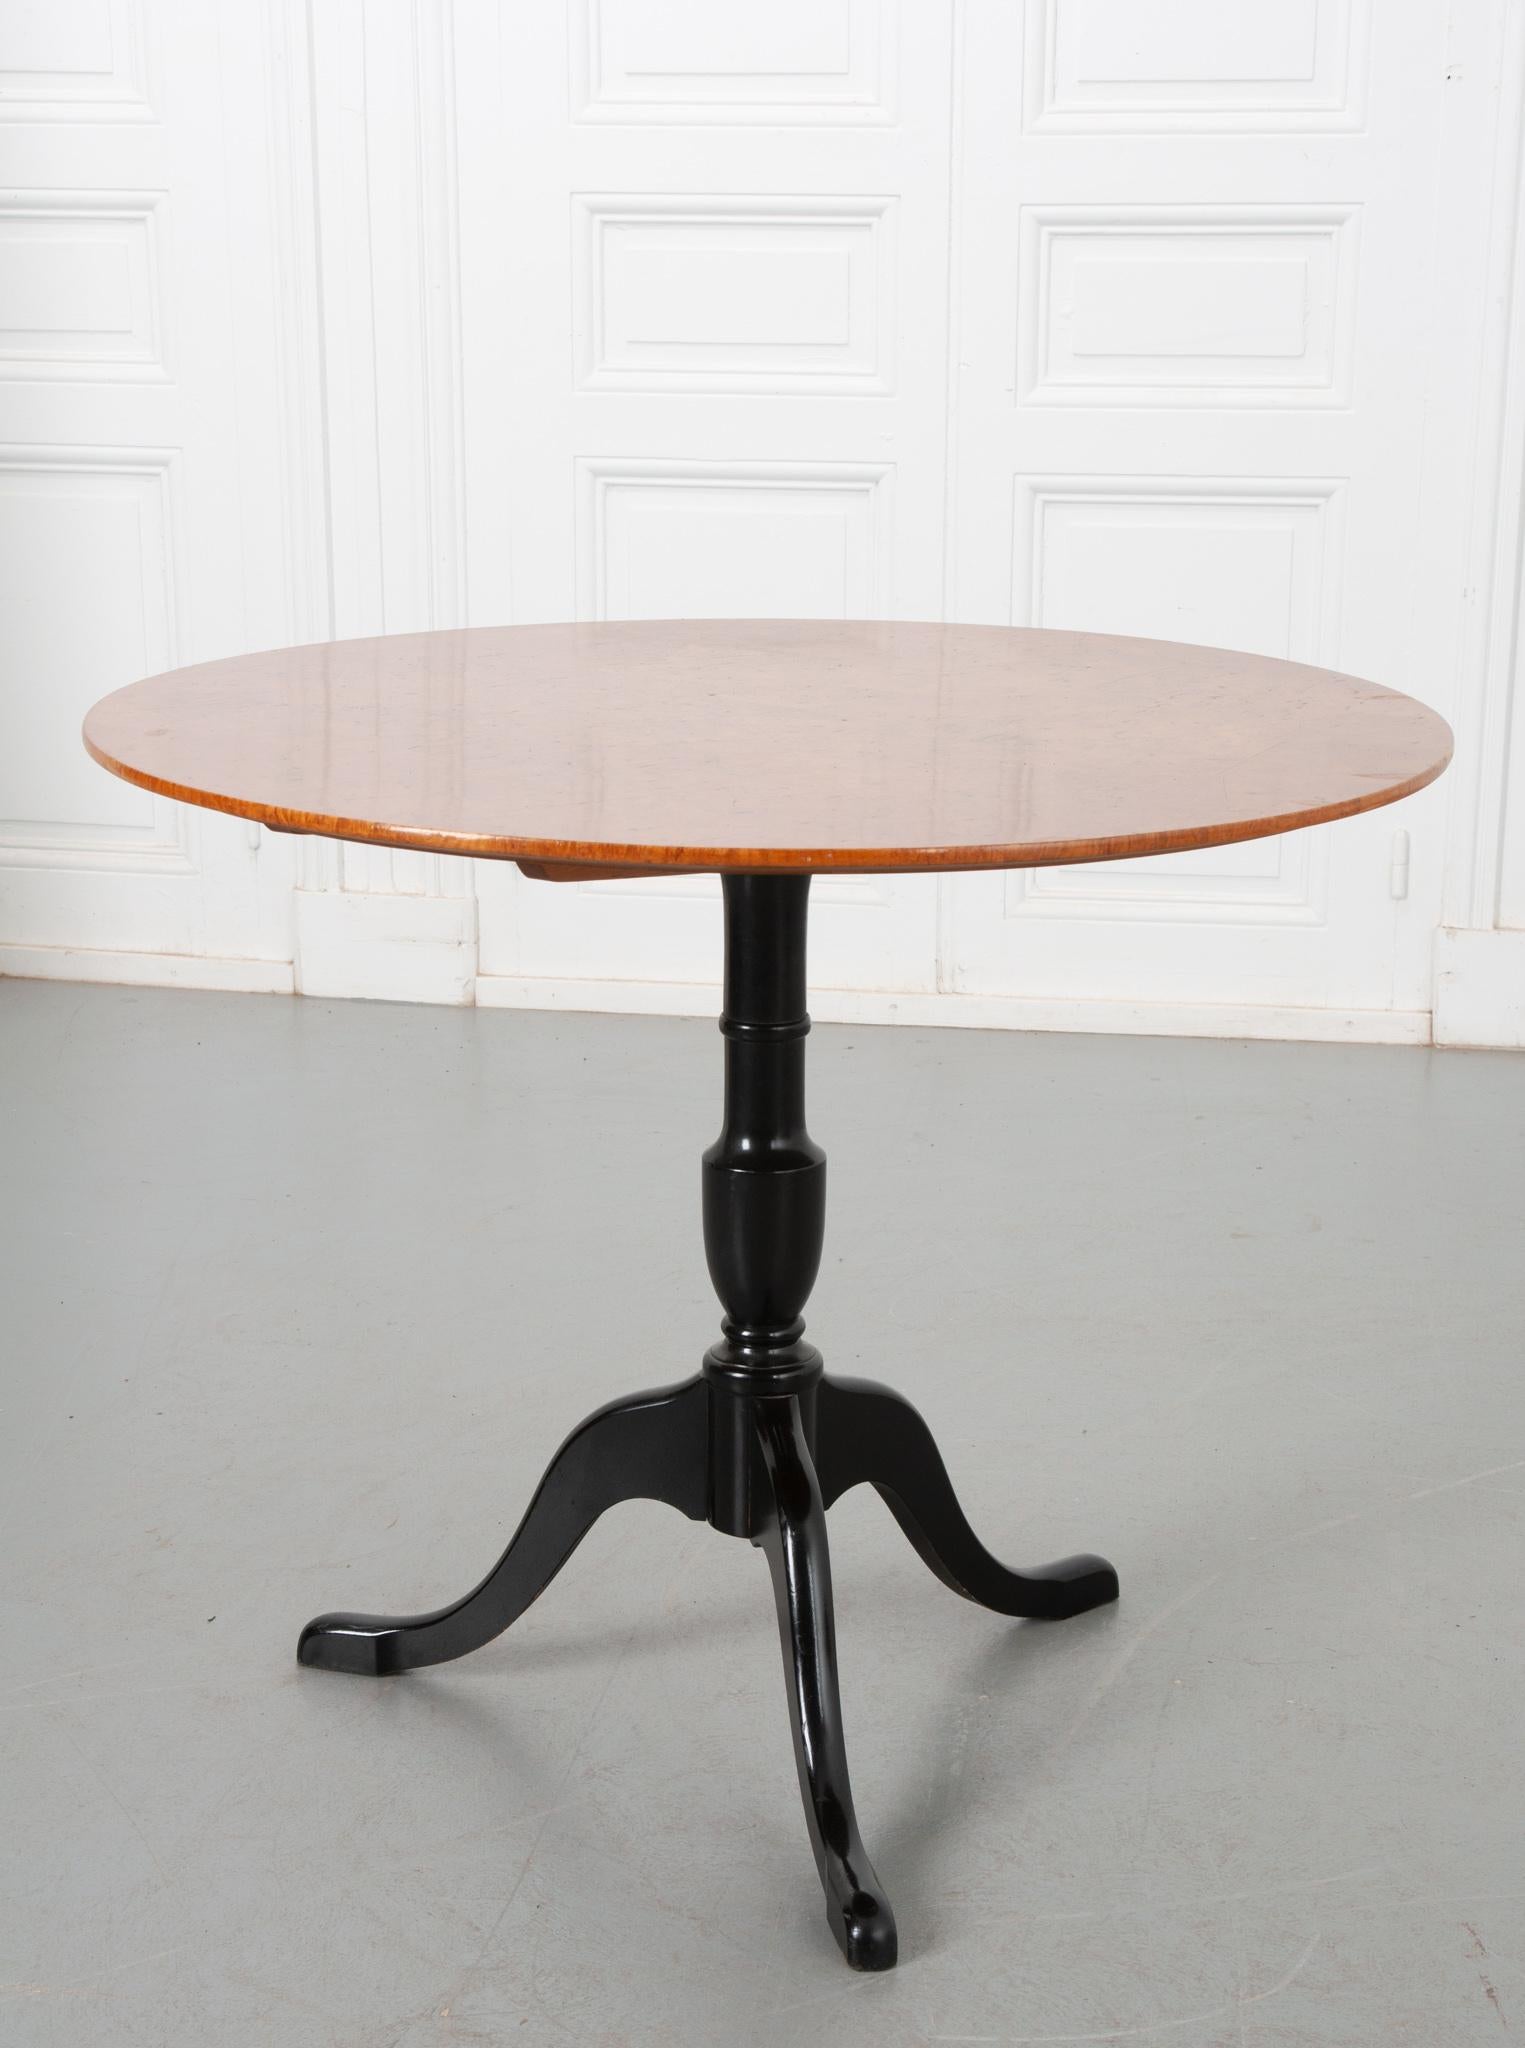 An eye-catching tilt-top table from Sweden, circa 1900. The top is made of vibrant birch that beautifully contrasts with the supper foot ebony base. This table has the ability to be stored away when not in use thanks to the tilting mechanism that